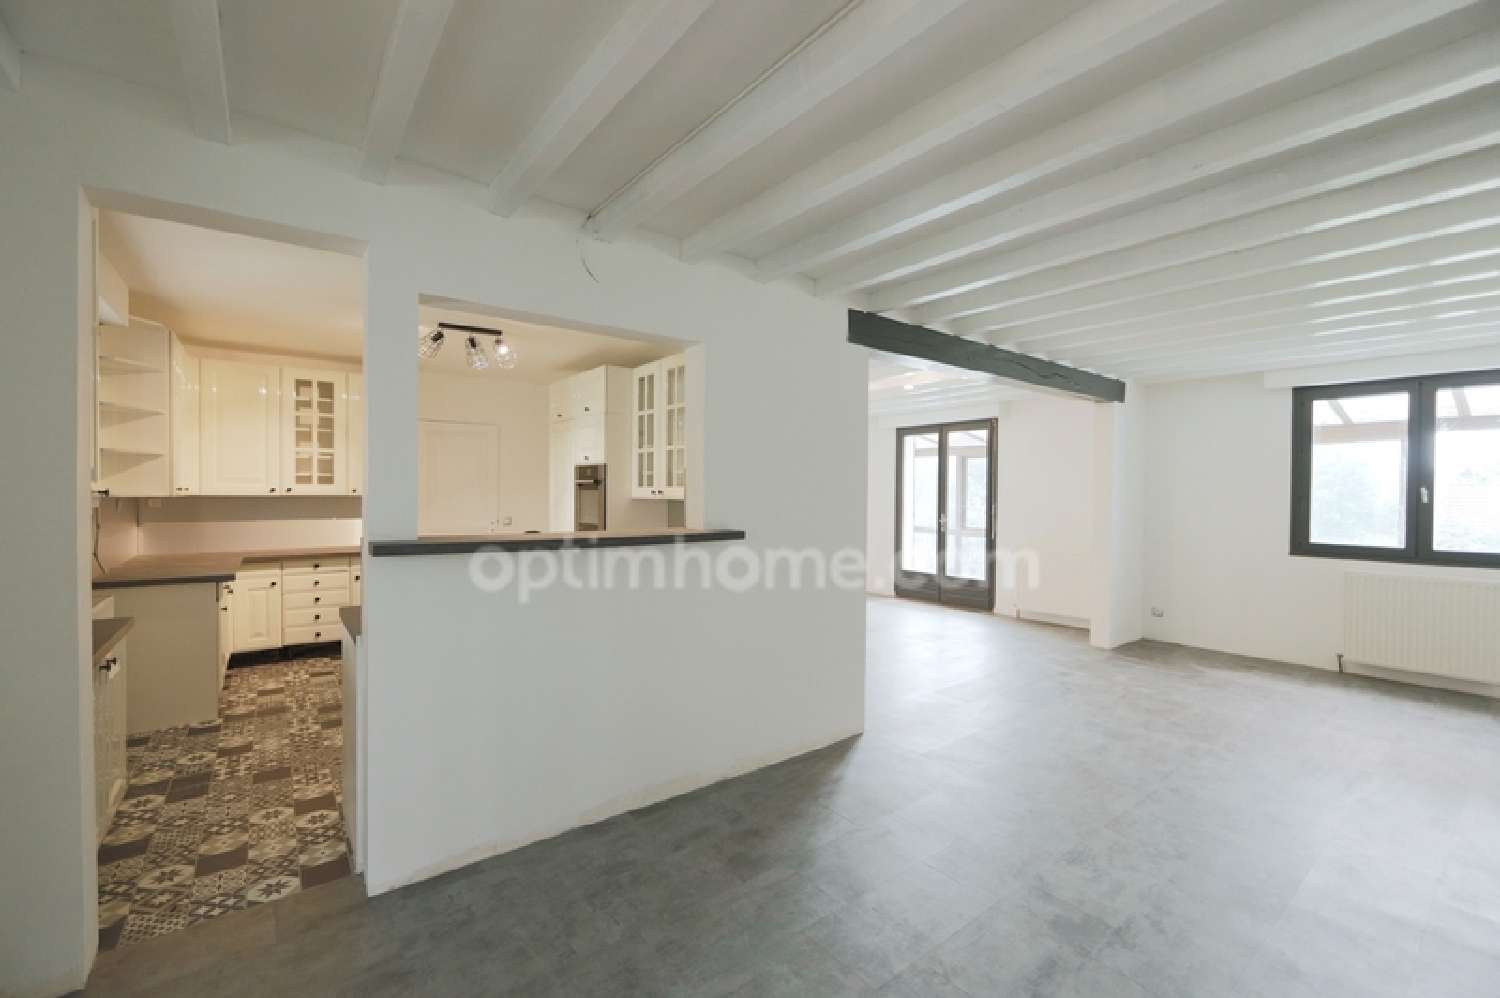 Chambly Oise appartement foto 6819185